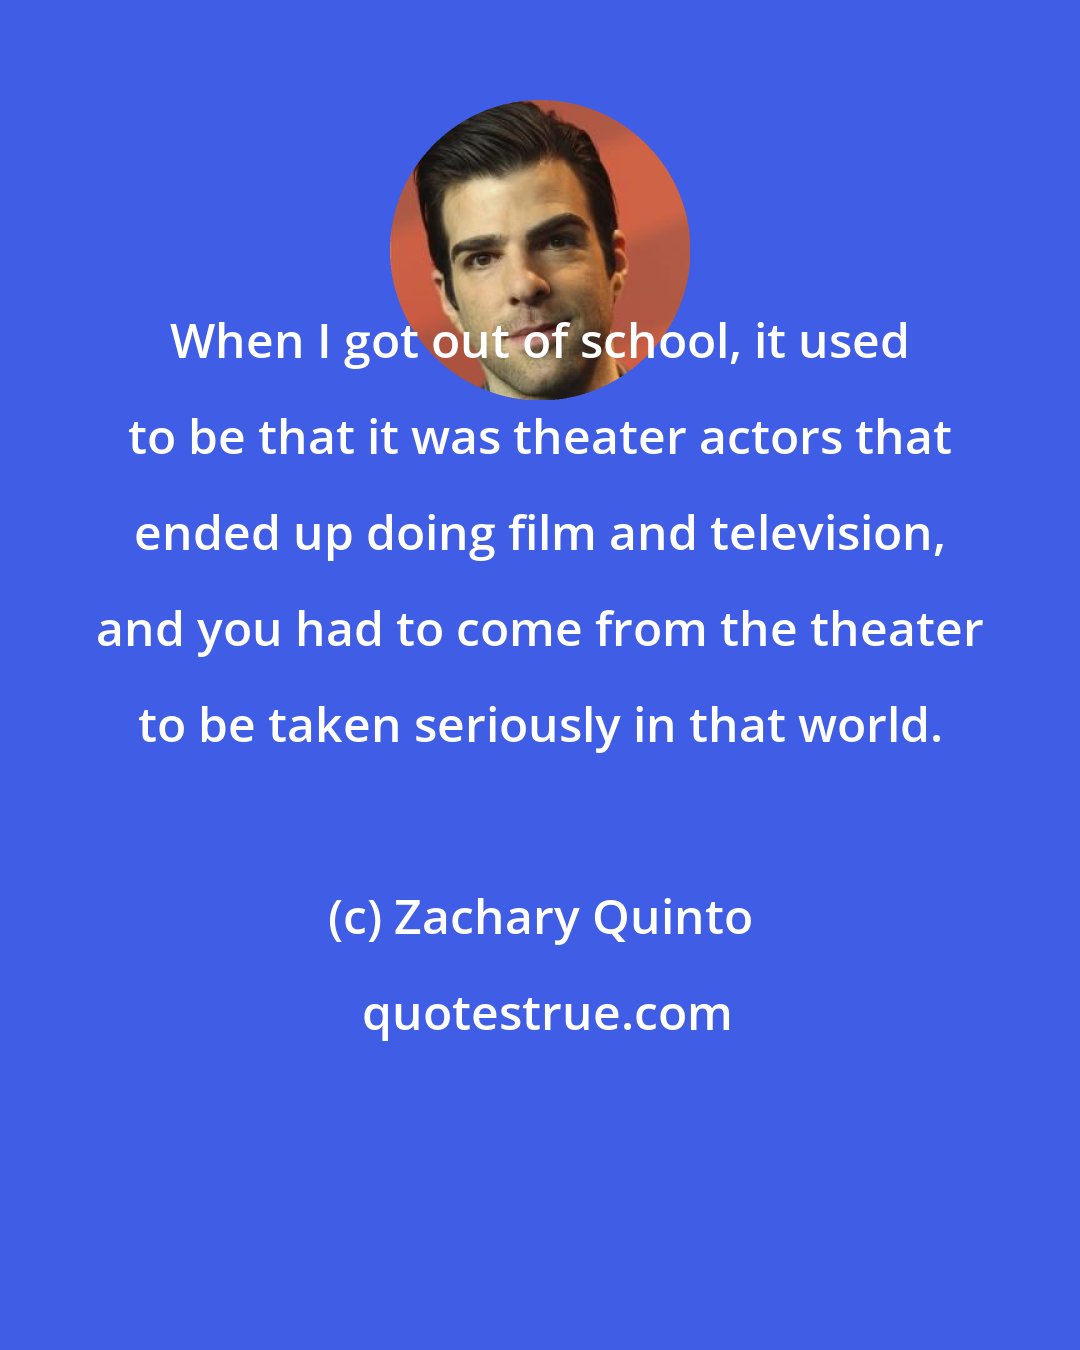 Zachary Quinto: When I got out of school, it used to be that it was theater actors that ended up doing film and television, and you had to come from the theater to be taken seriously in that world.